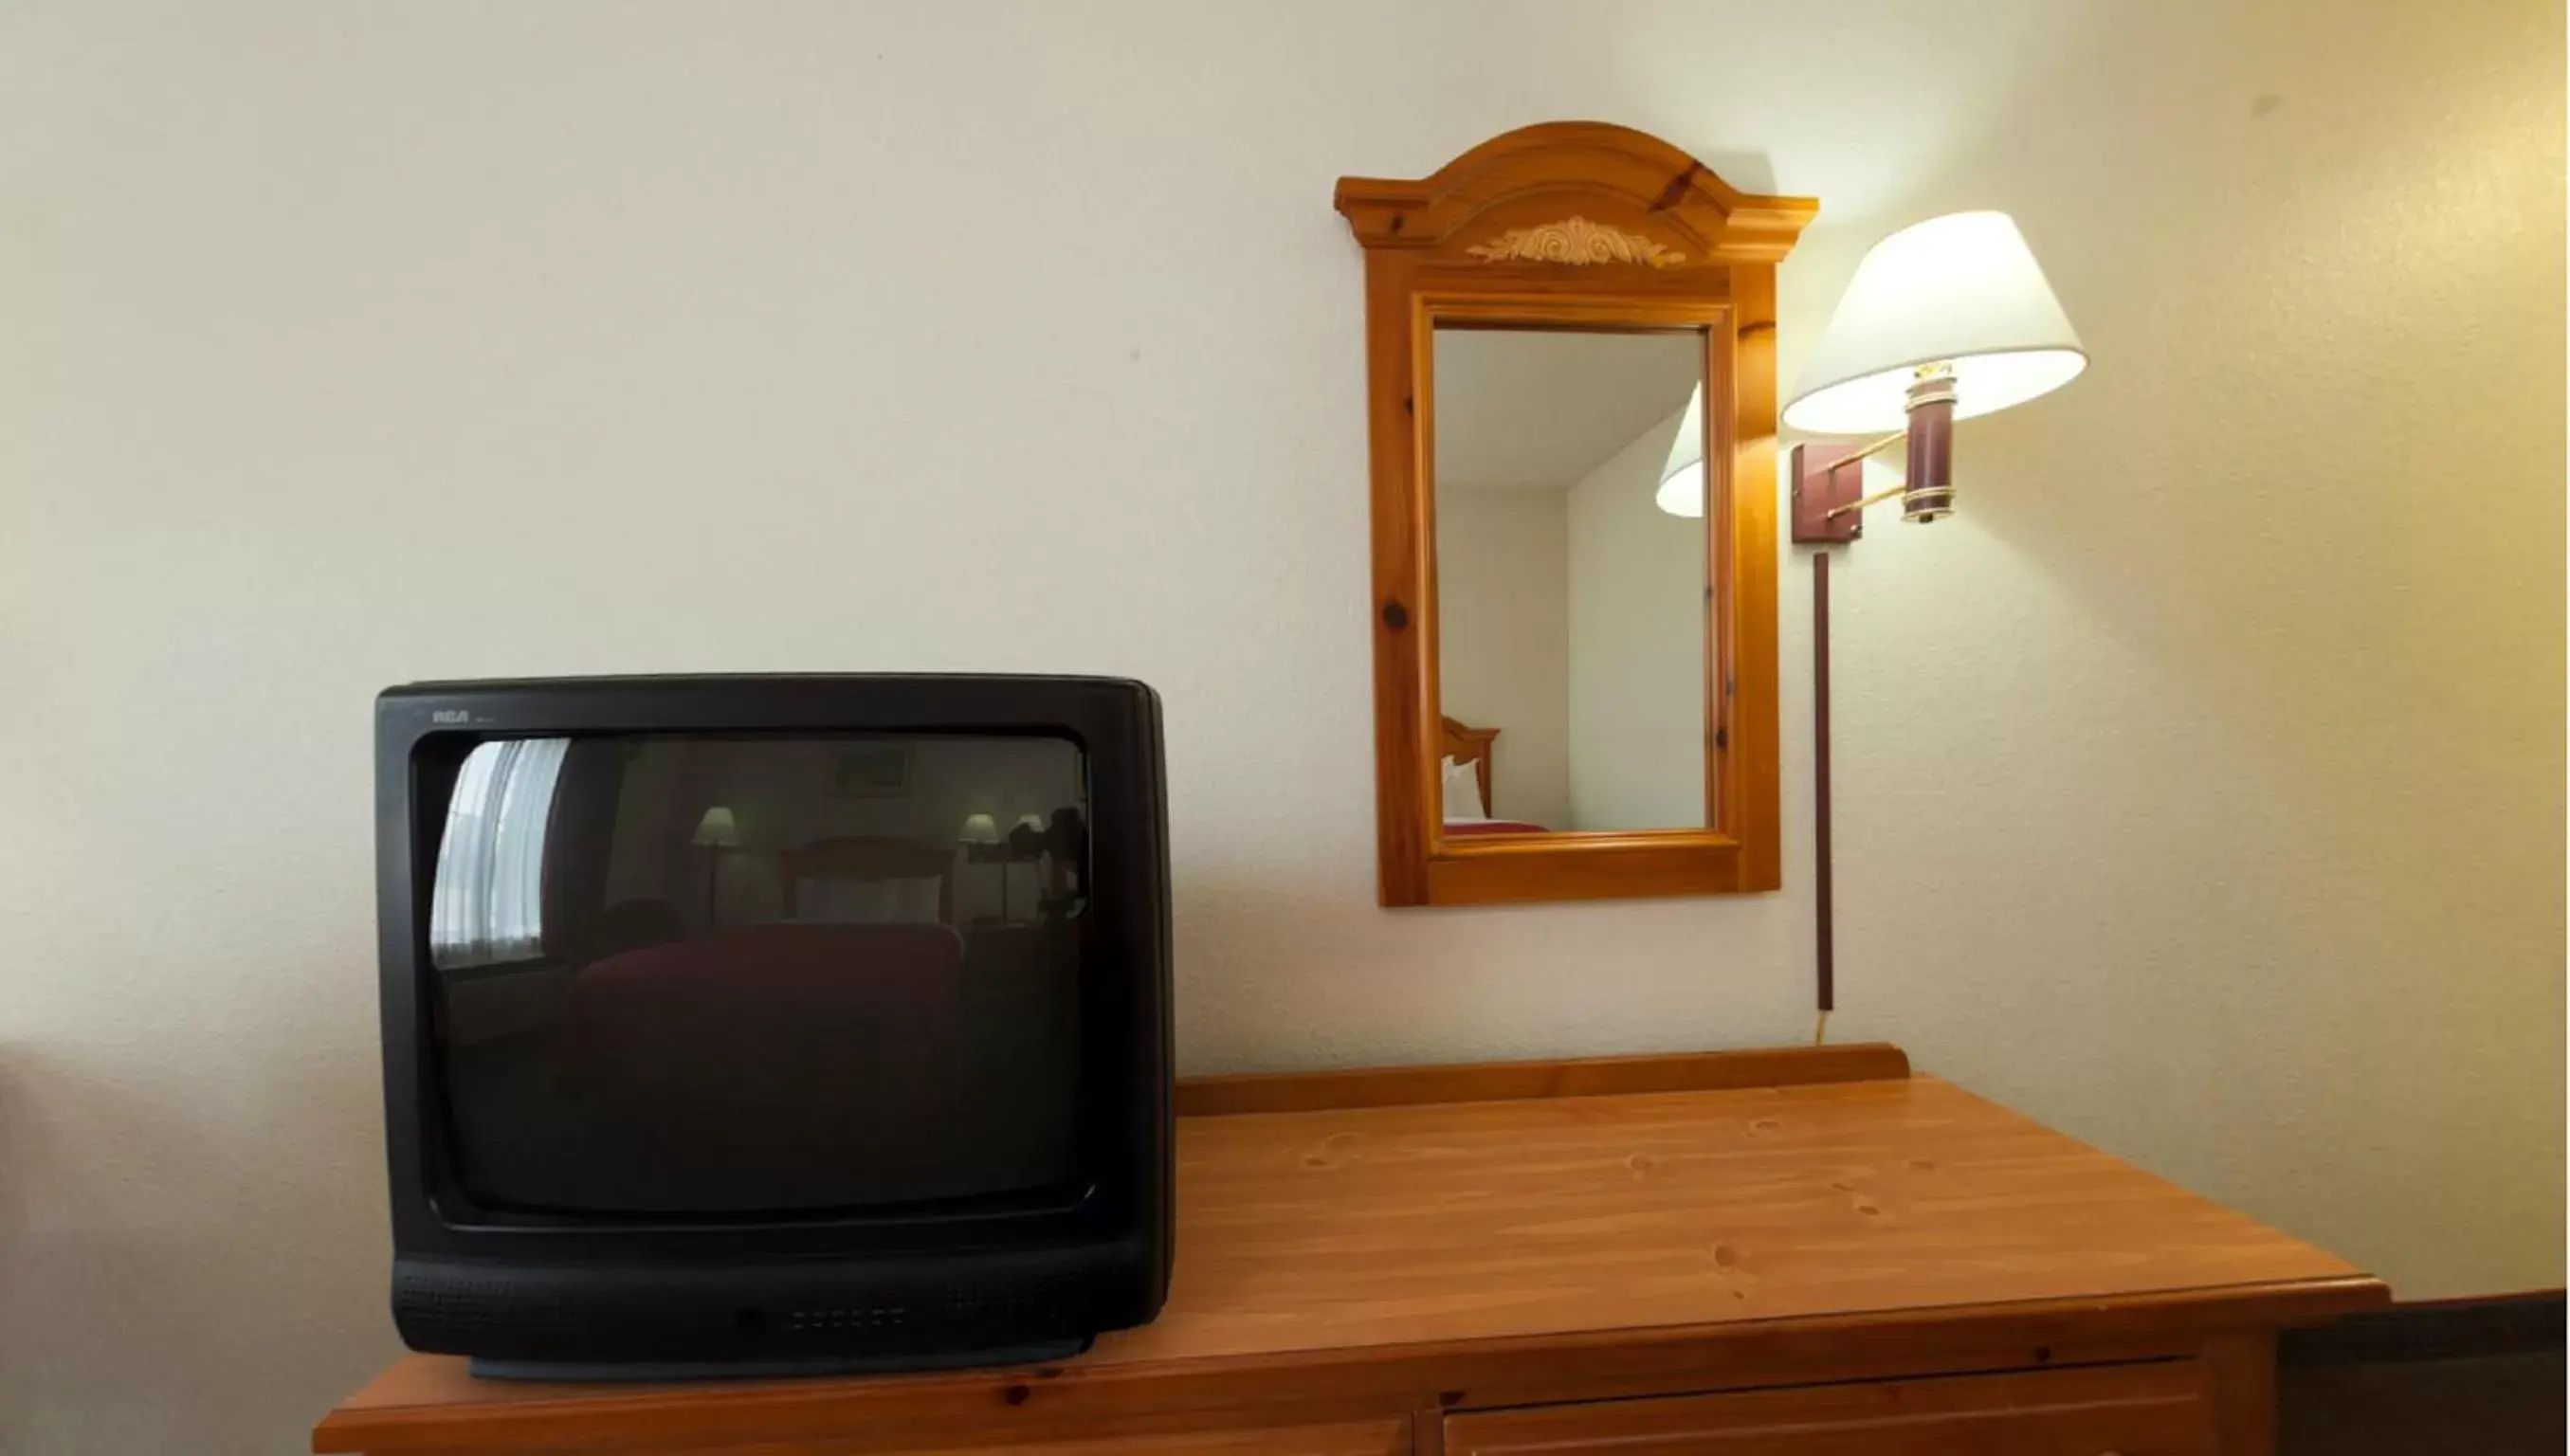 Decorative detail, TV/Entertainment Center in Country Inn & Suites by Radisson, Indianapolis South, IN